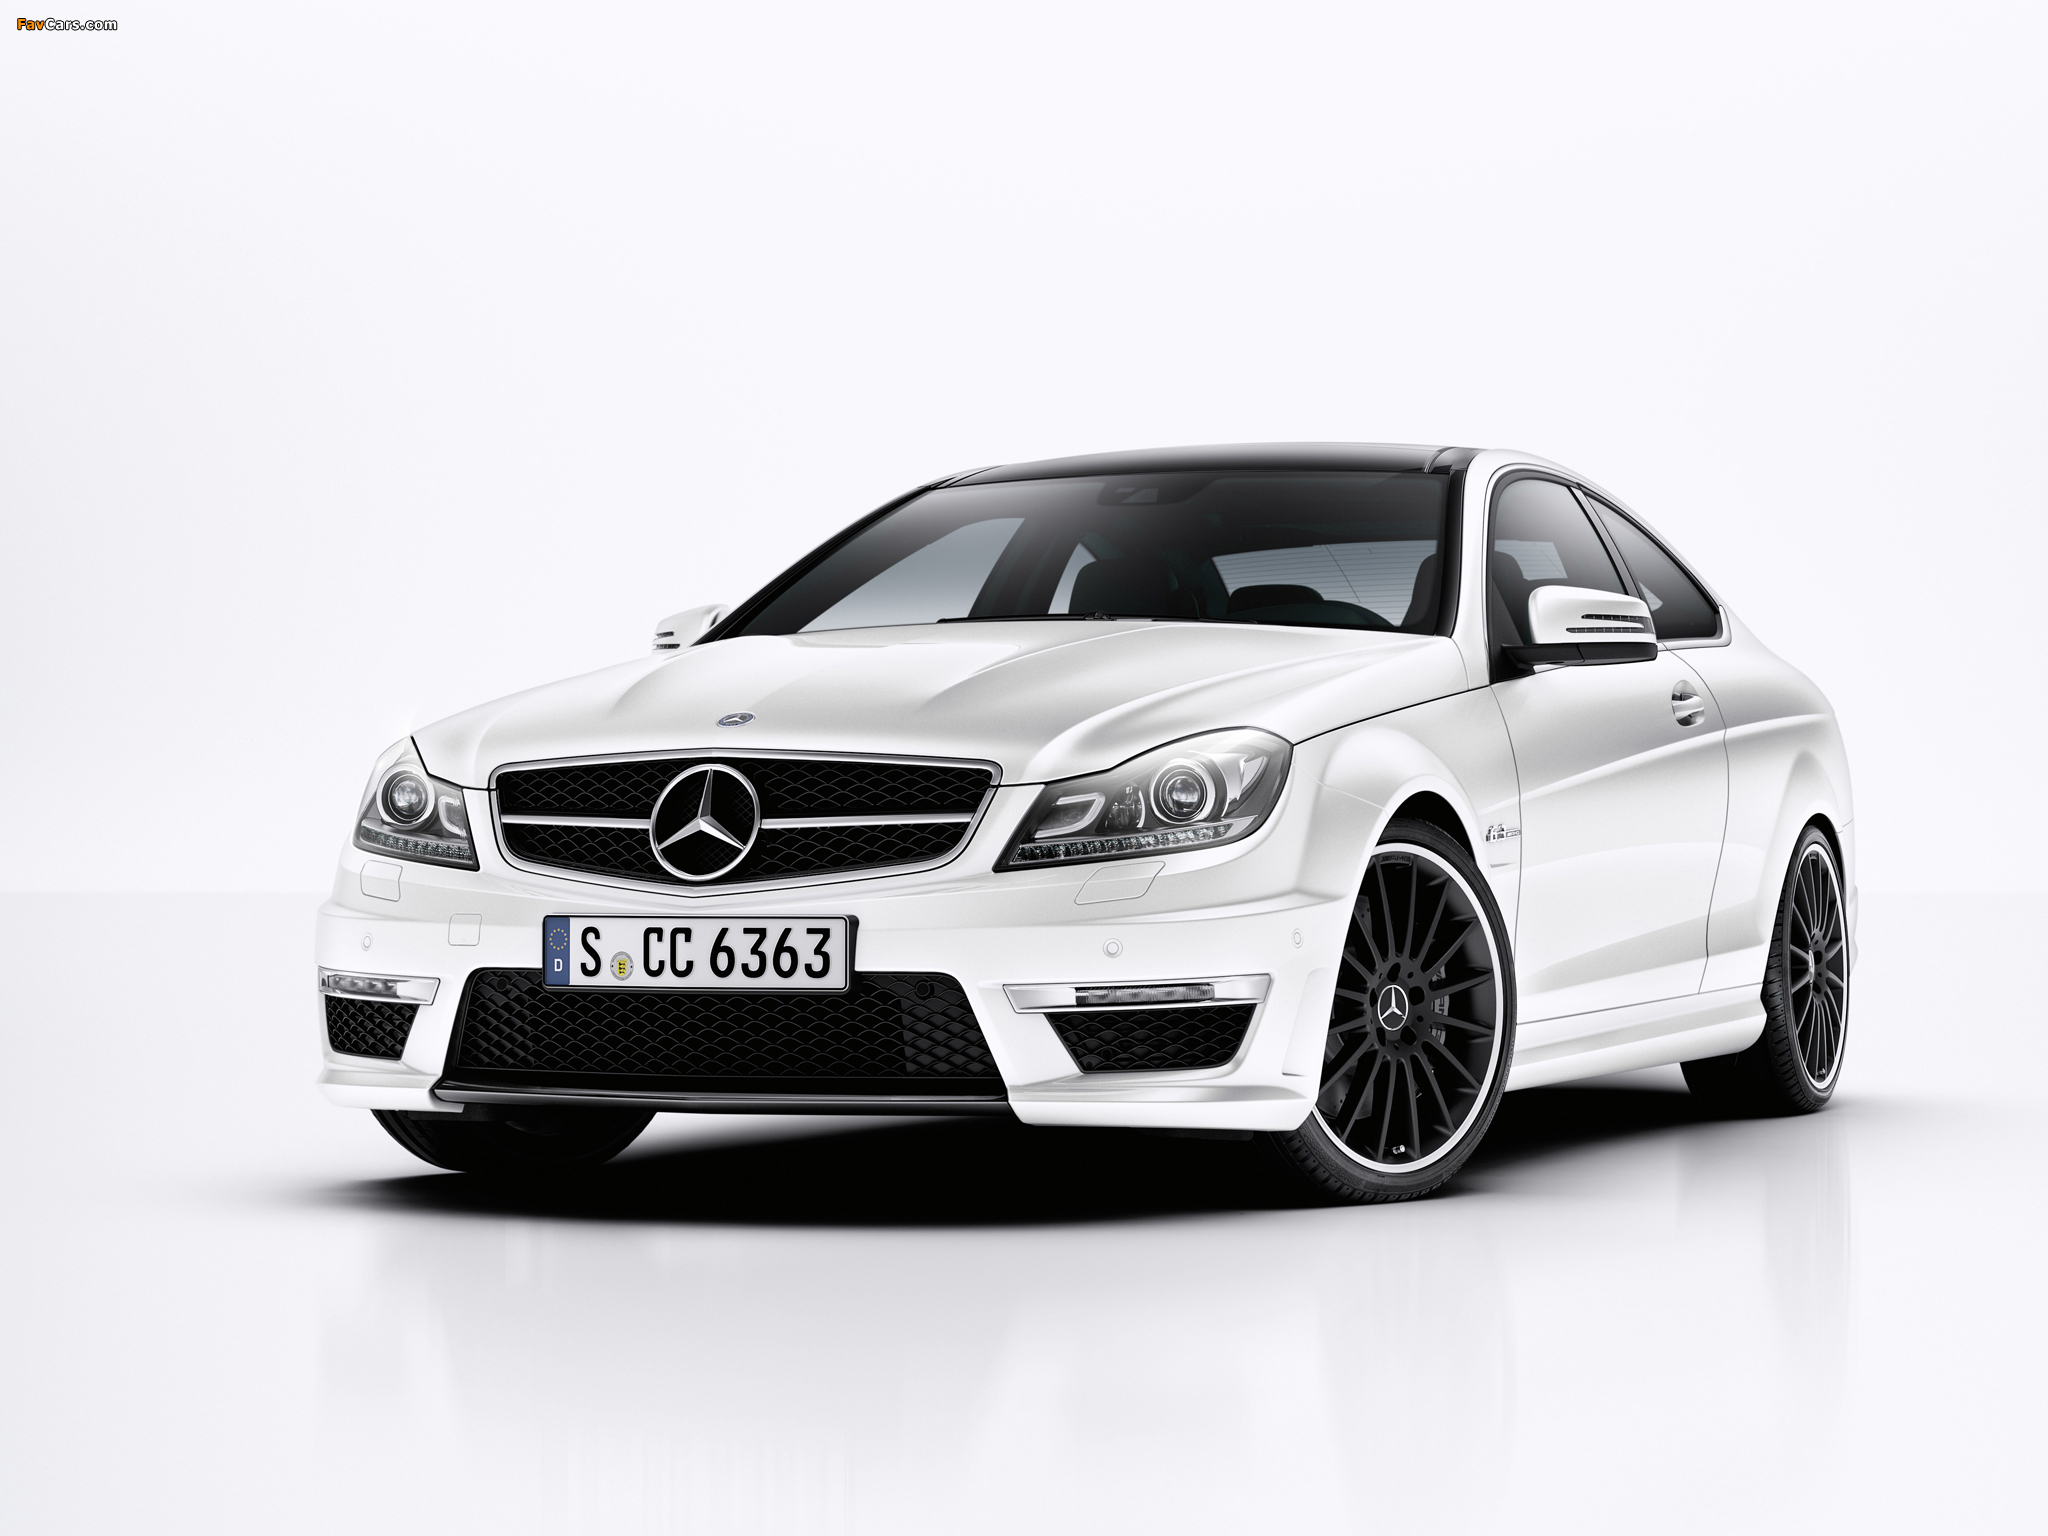 Mercedes-Benz C 63 AMG Coupe (C204) 2011 pictures (2048 x 1536)